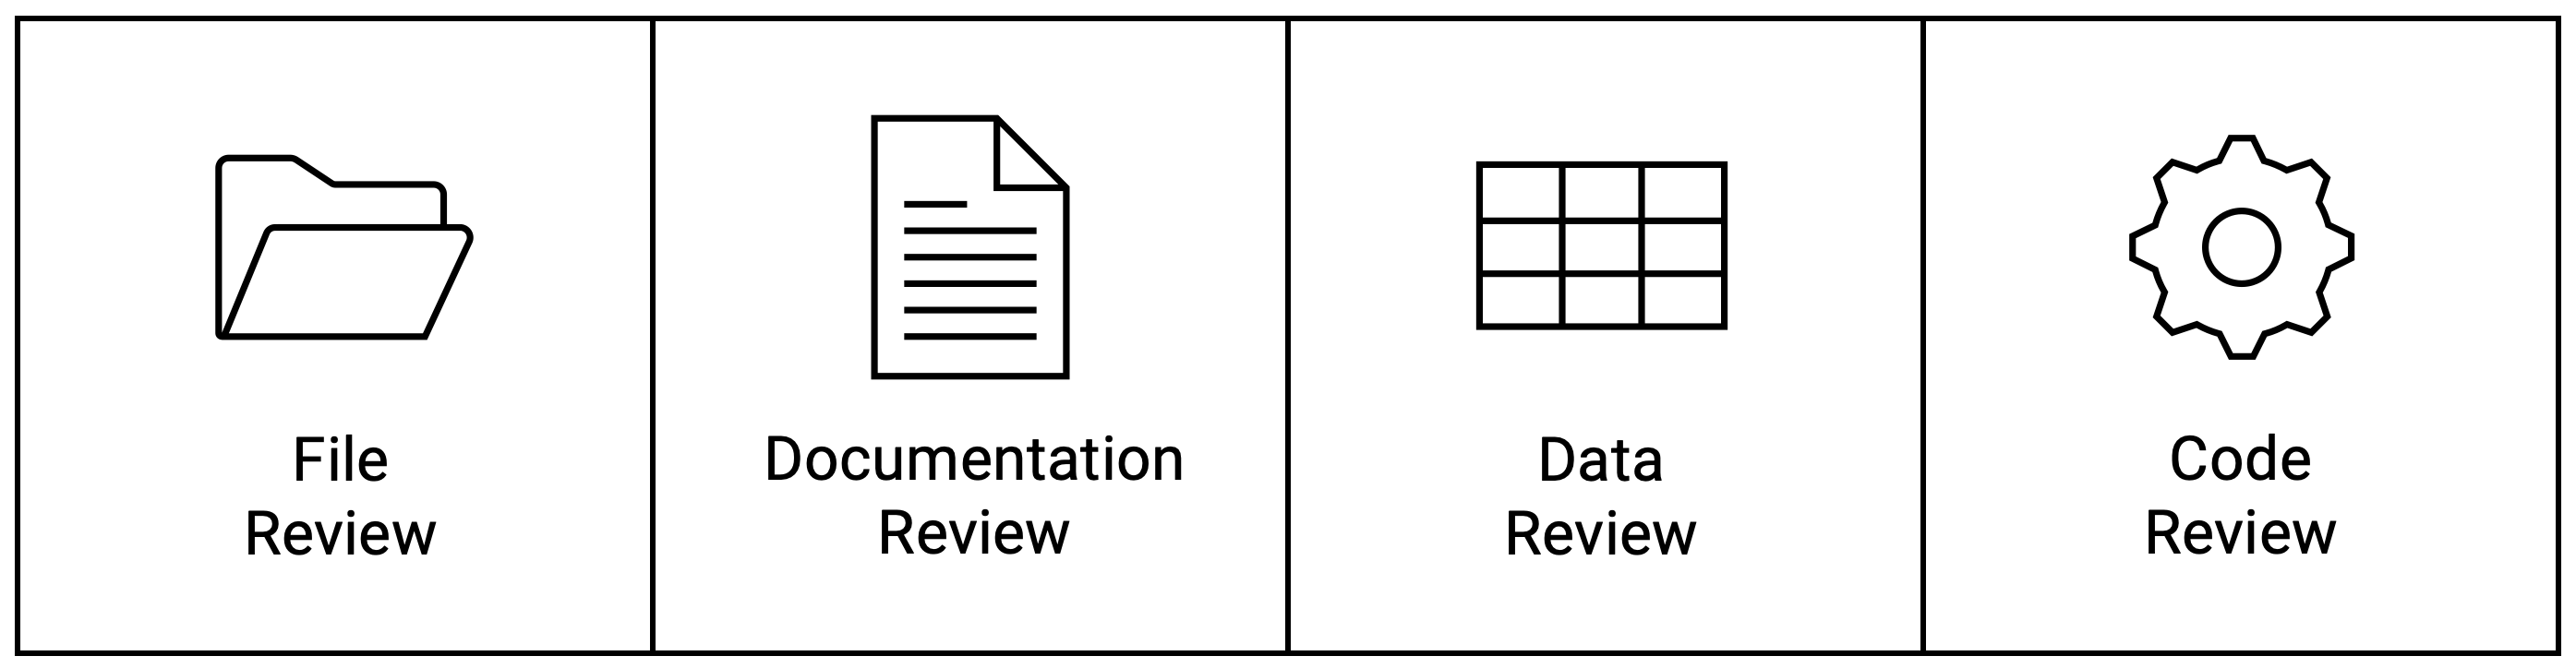 Data Quality Review framework components